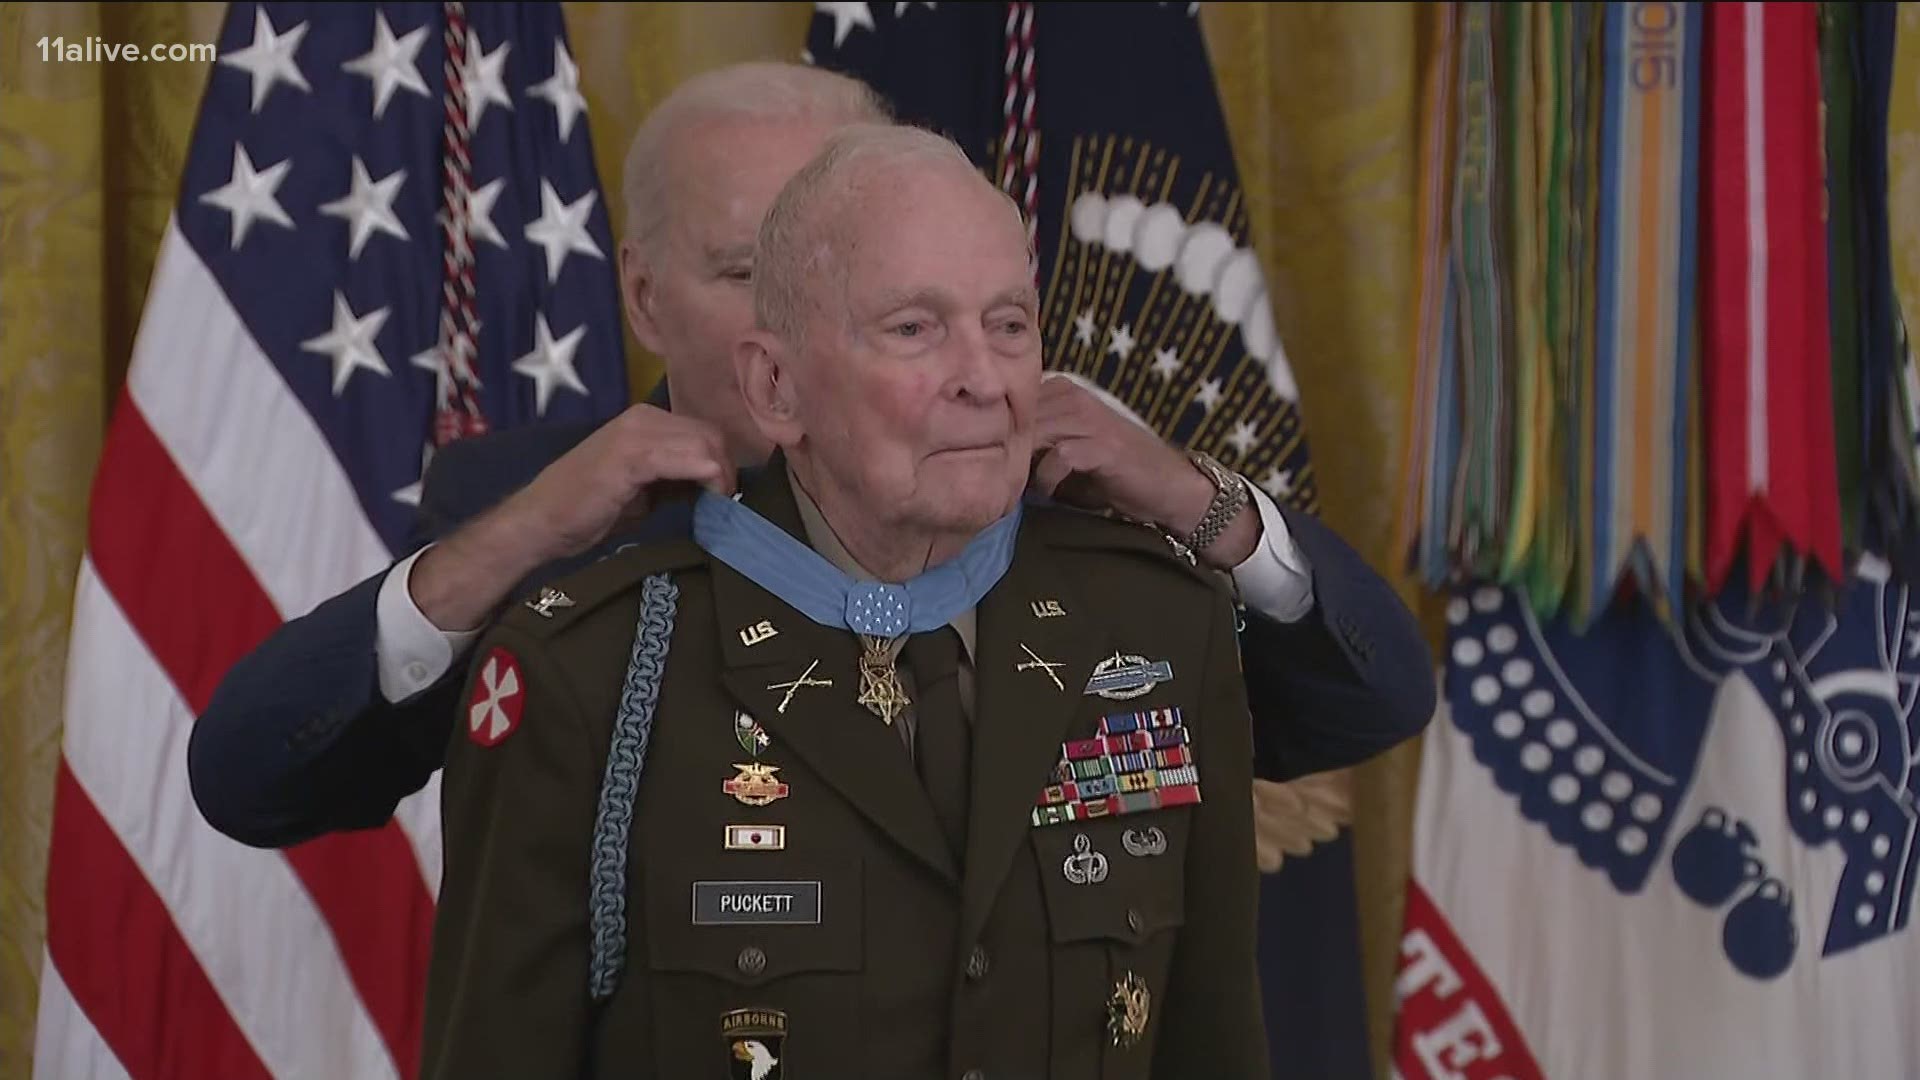 Retired Army Col. Ralph Puckett Jr., of Columbus, was recognized for his "acts of gallantry and intrepidity above and beyond the call of duty."